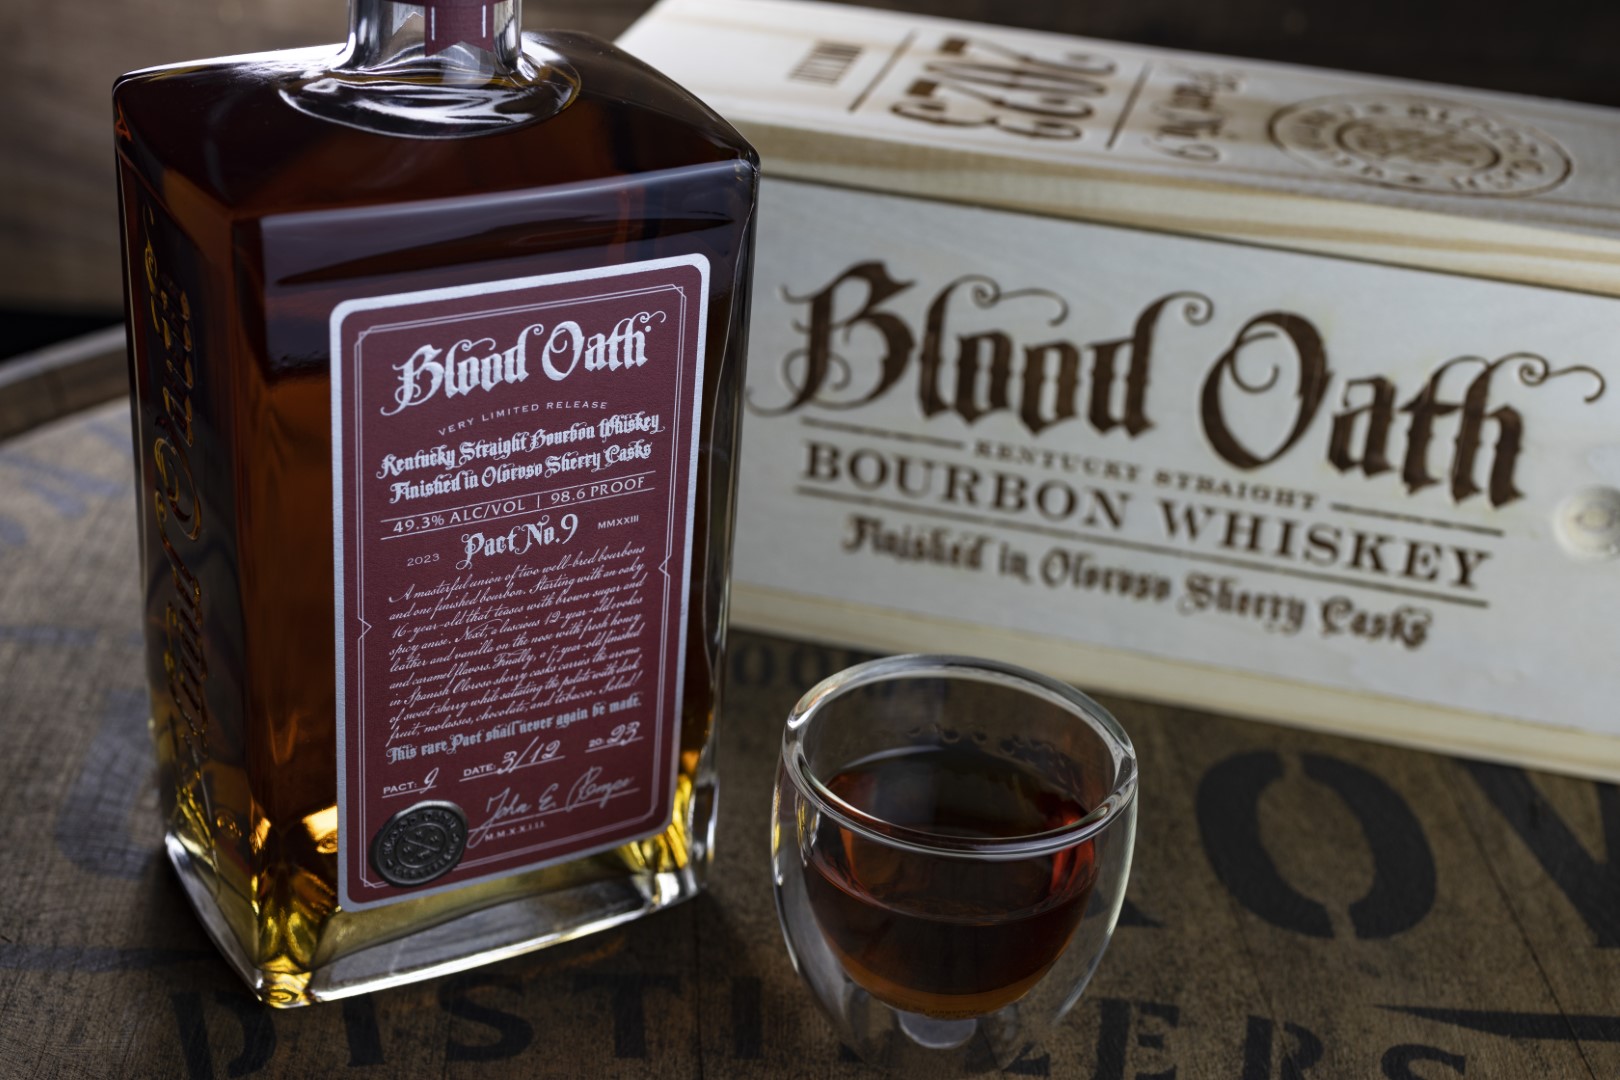 Blood Oath Bourbon Whiskey Pact 9 2023